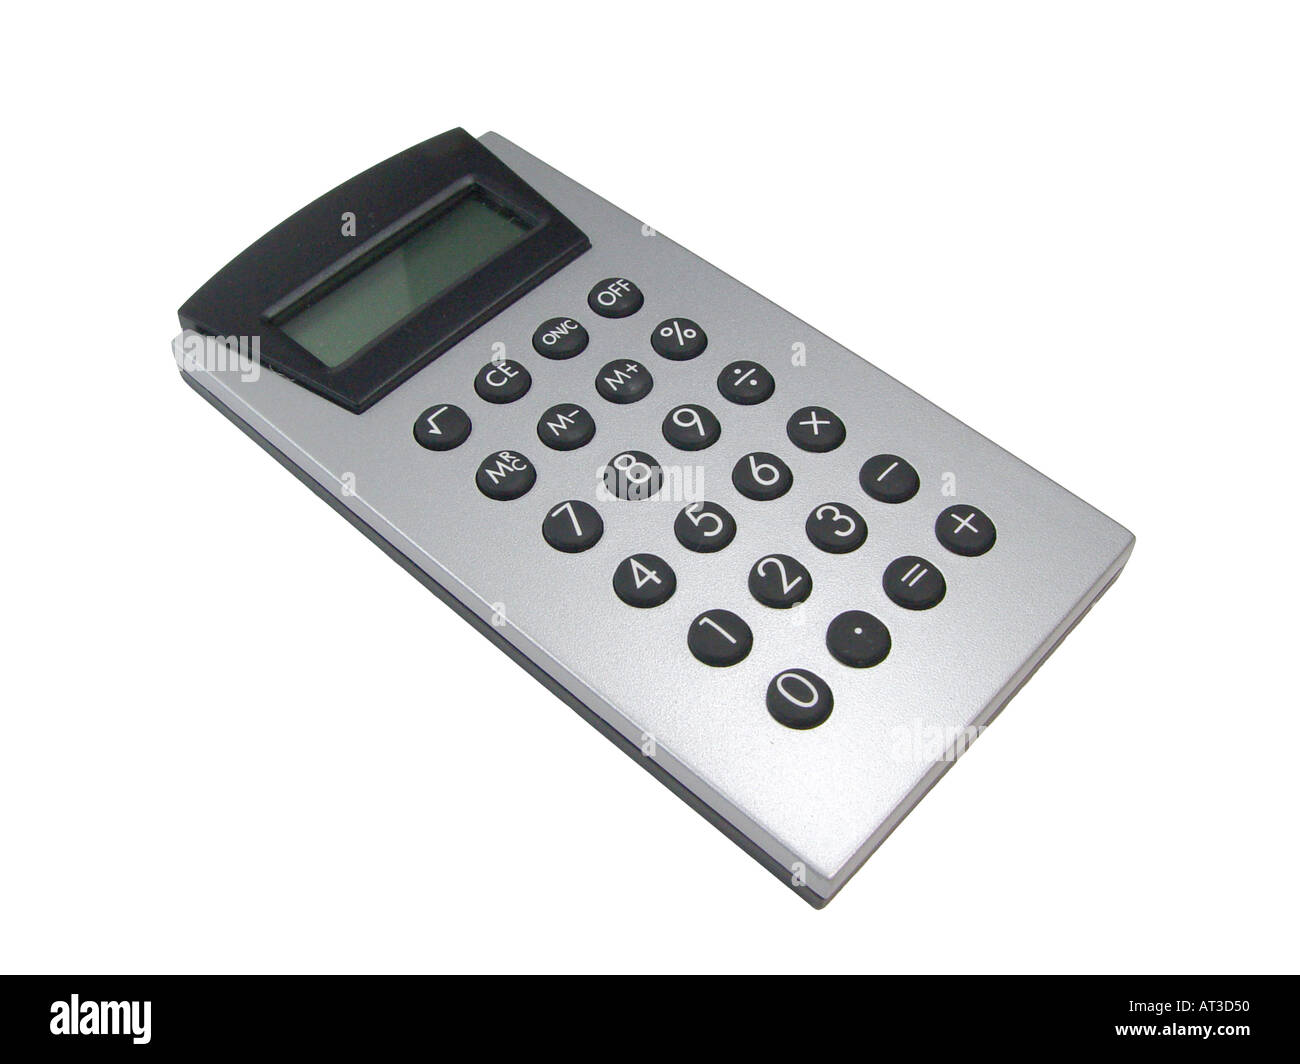 Pocket calculator as symbol for computations e g for the pension system taxes finances Stock Photo